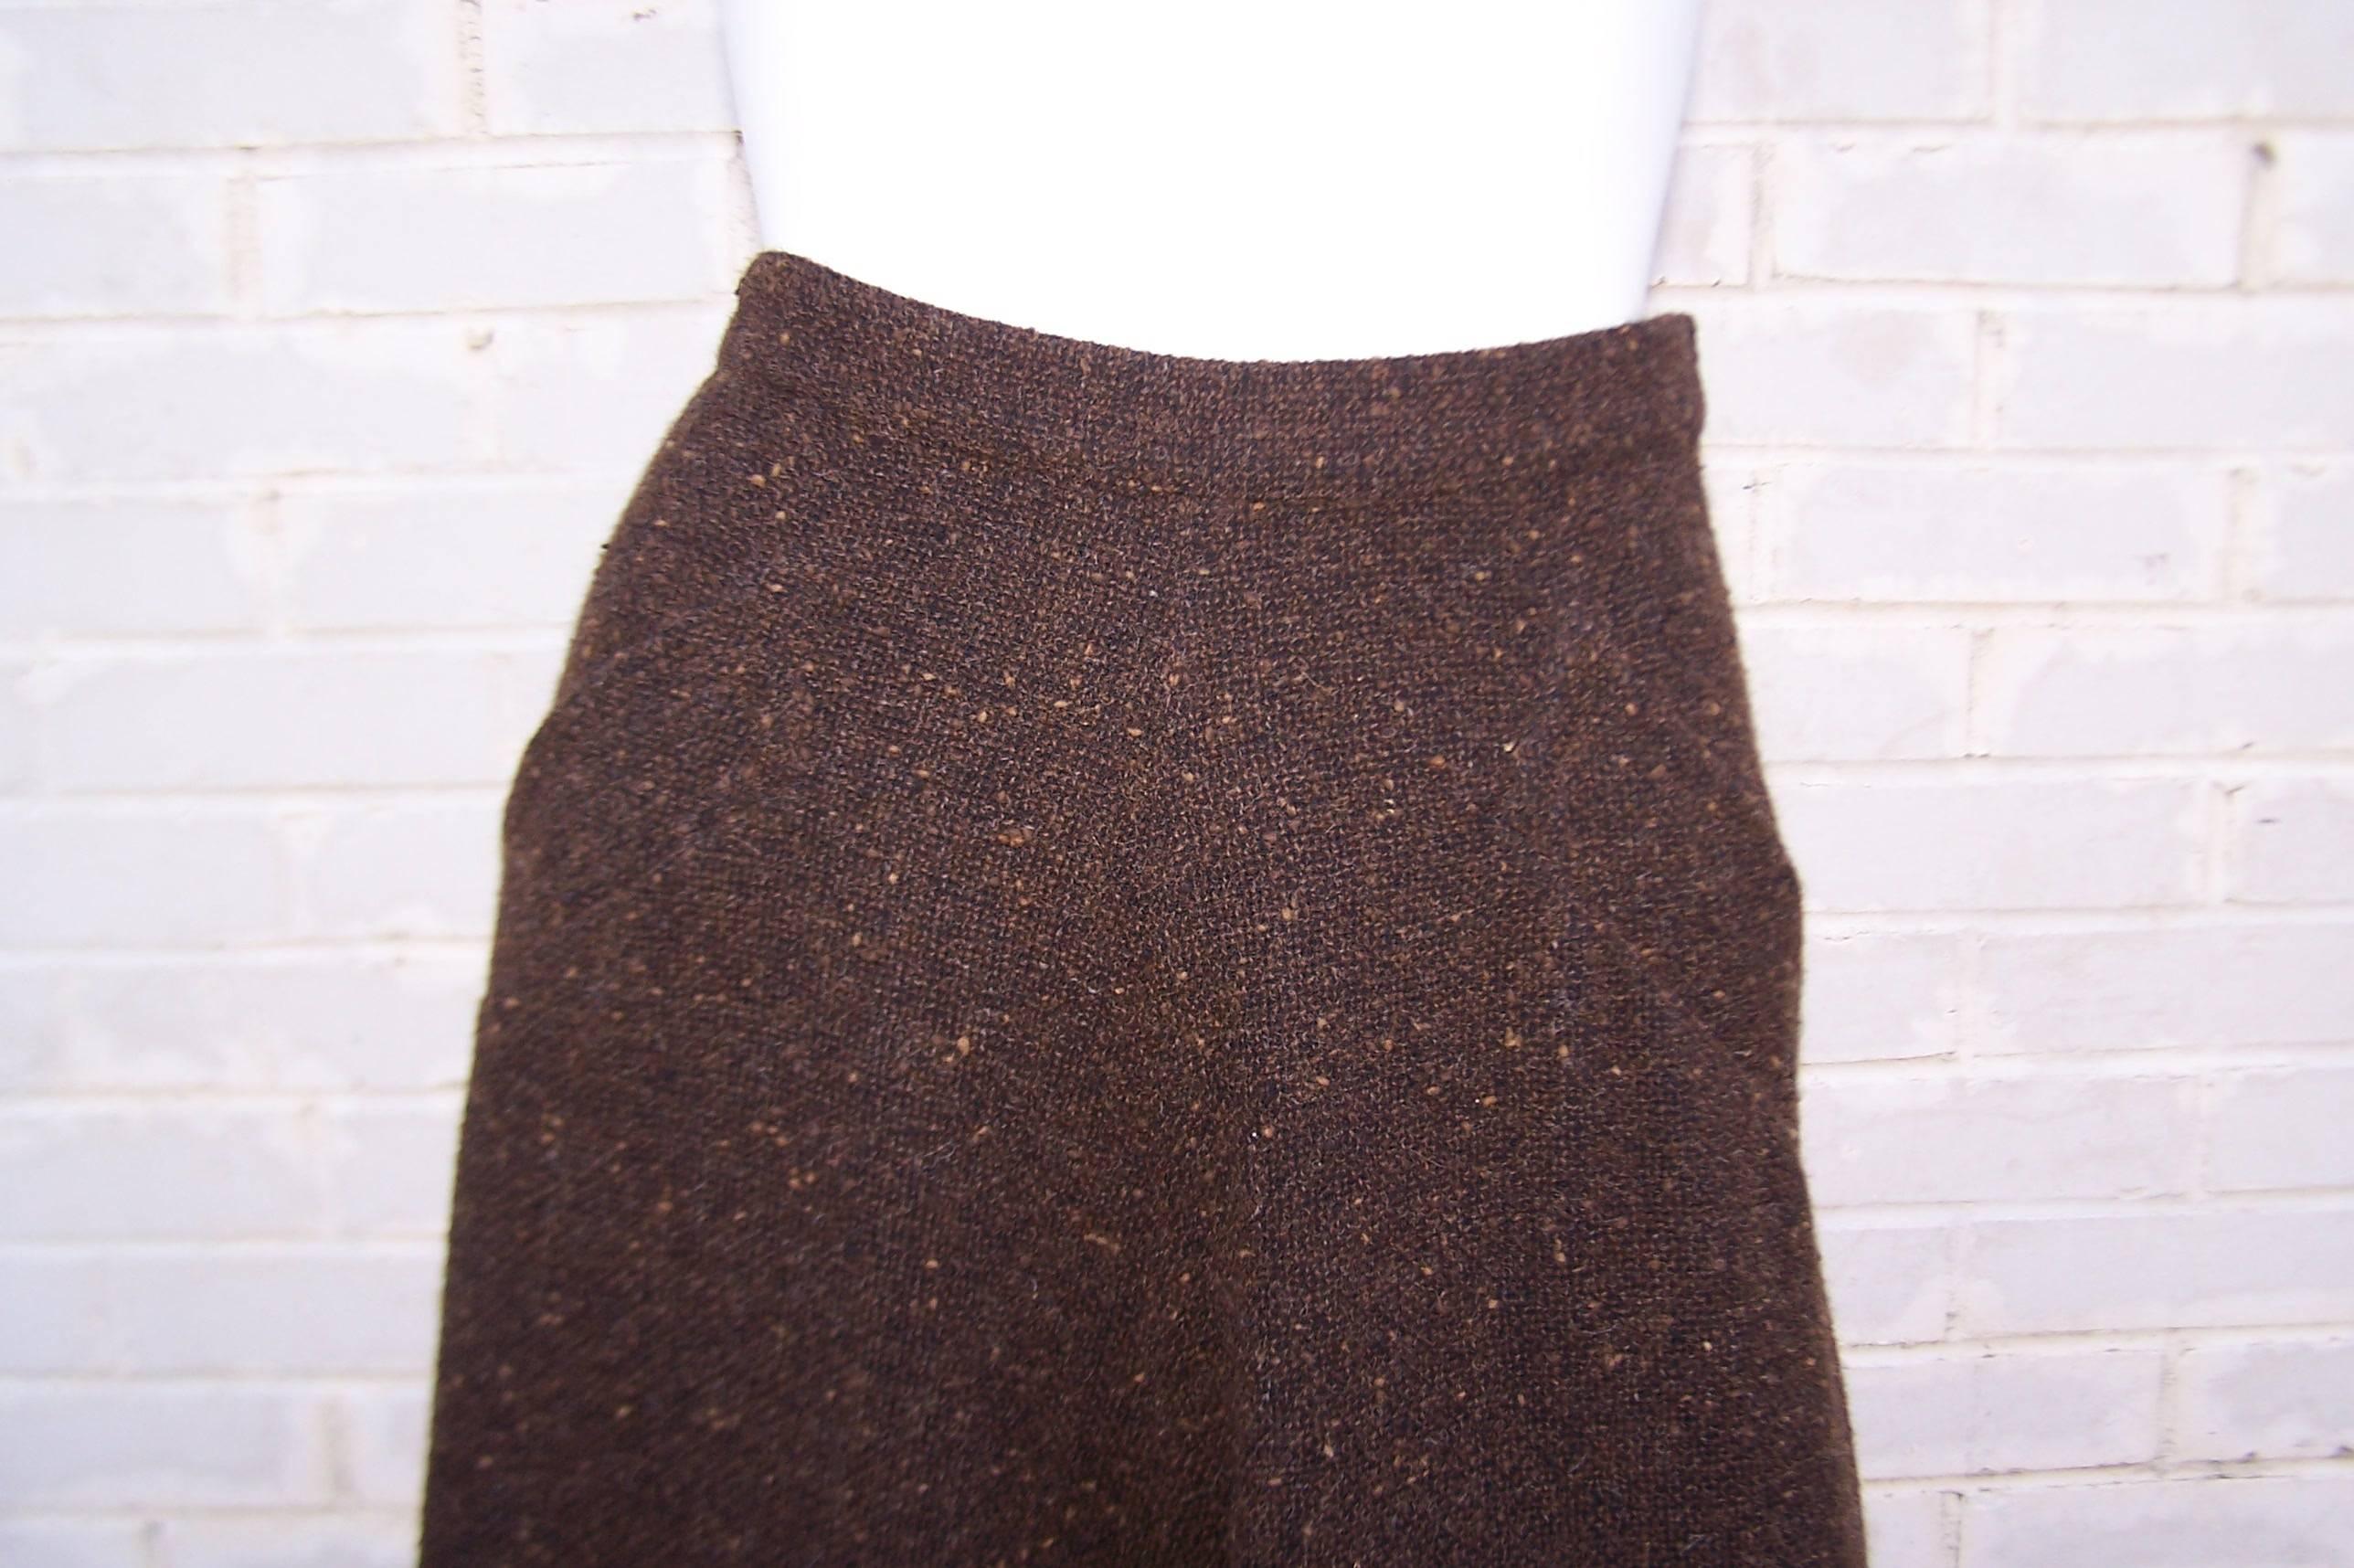 Great little skirt to pair with a sweater or cropped leather jacket from Yves Saint Laurent Haute Couture.  The autumnal brown fabric is a nubby tweed with hints of a black background and lighter colors in the mix.  The skirt zips and hooks at the